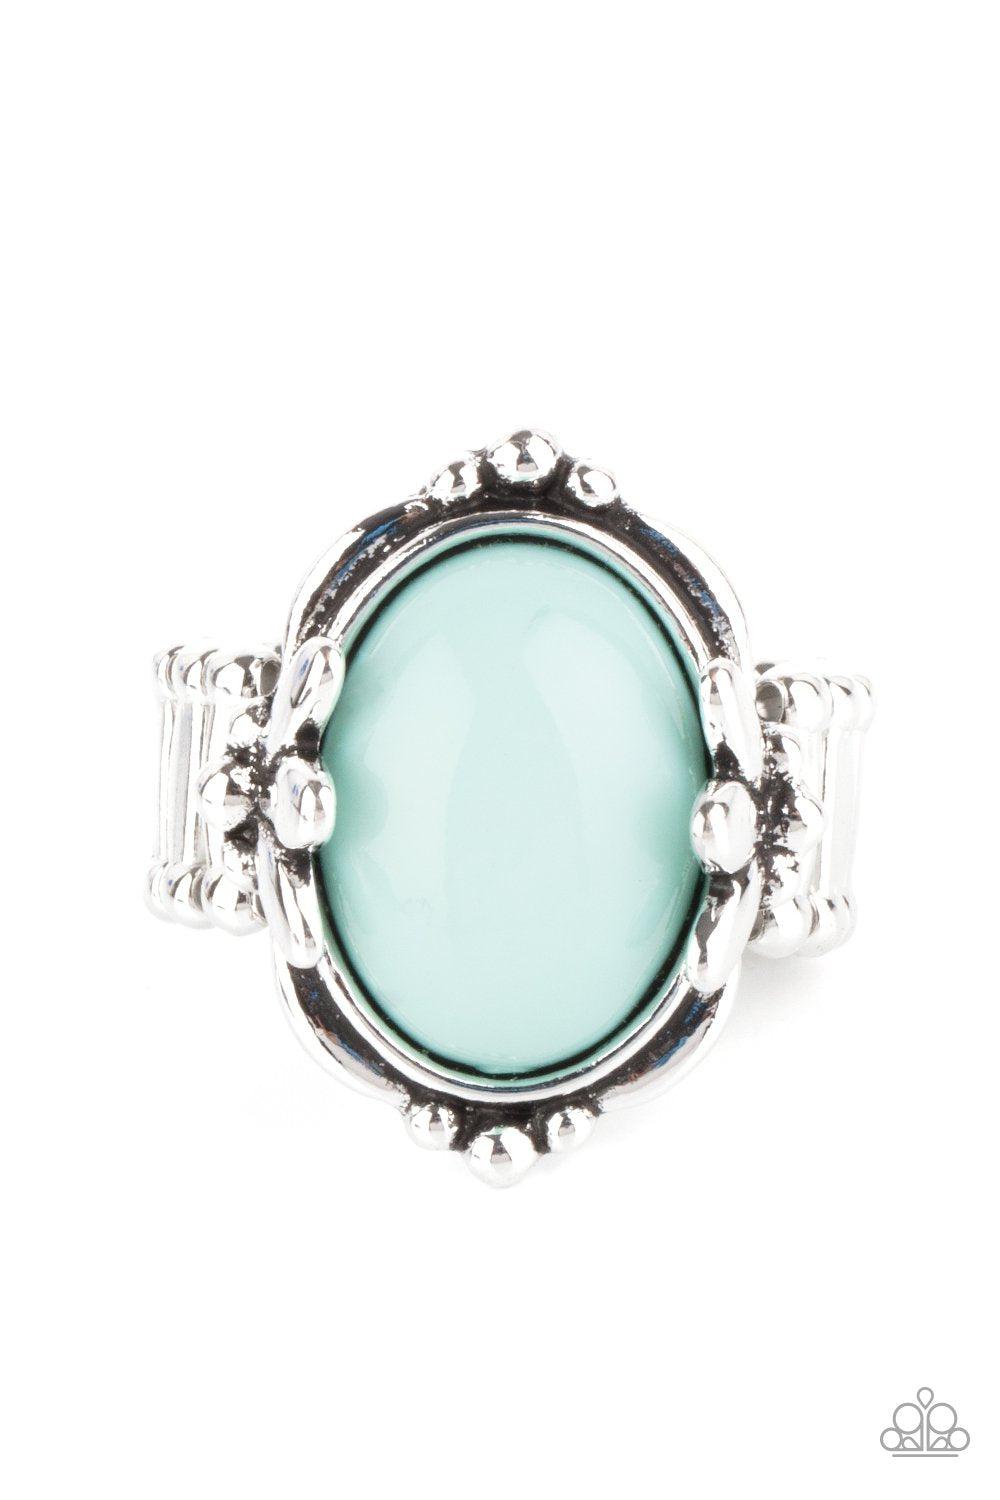 Springtime Splendor Blue and Silver Ring - Paparazzi Accessories- lightbox - CarasShop.com - $5 Jewelry by Cara Jewels